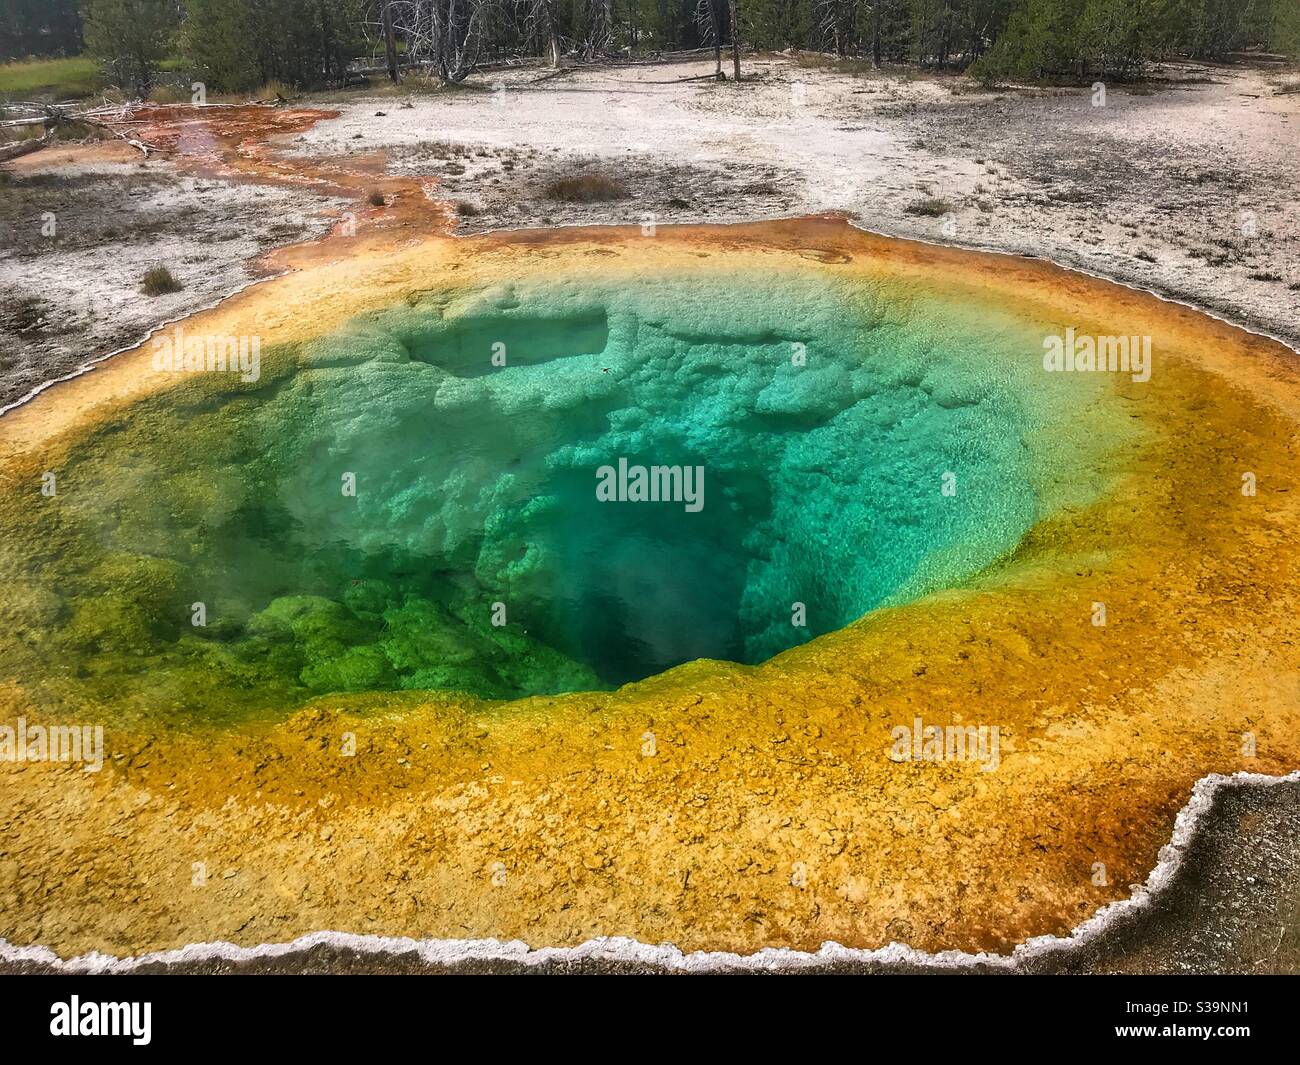 Morning Glory hot spring in Yellowstone National Park Stock Photo